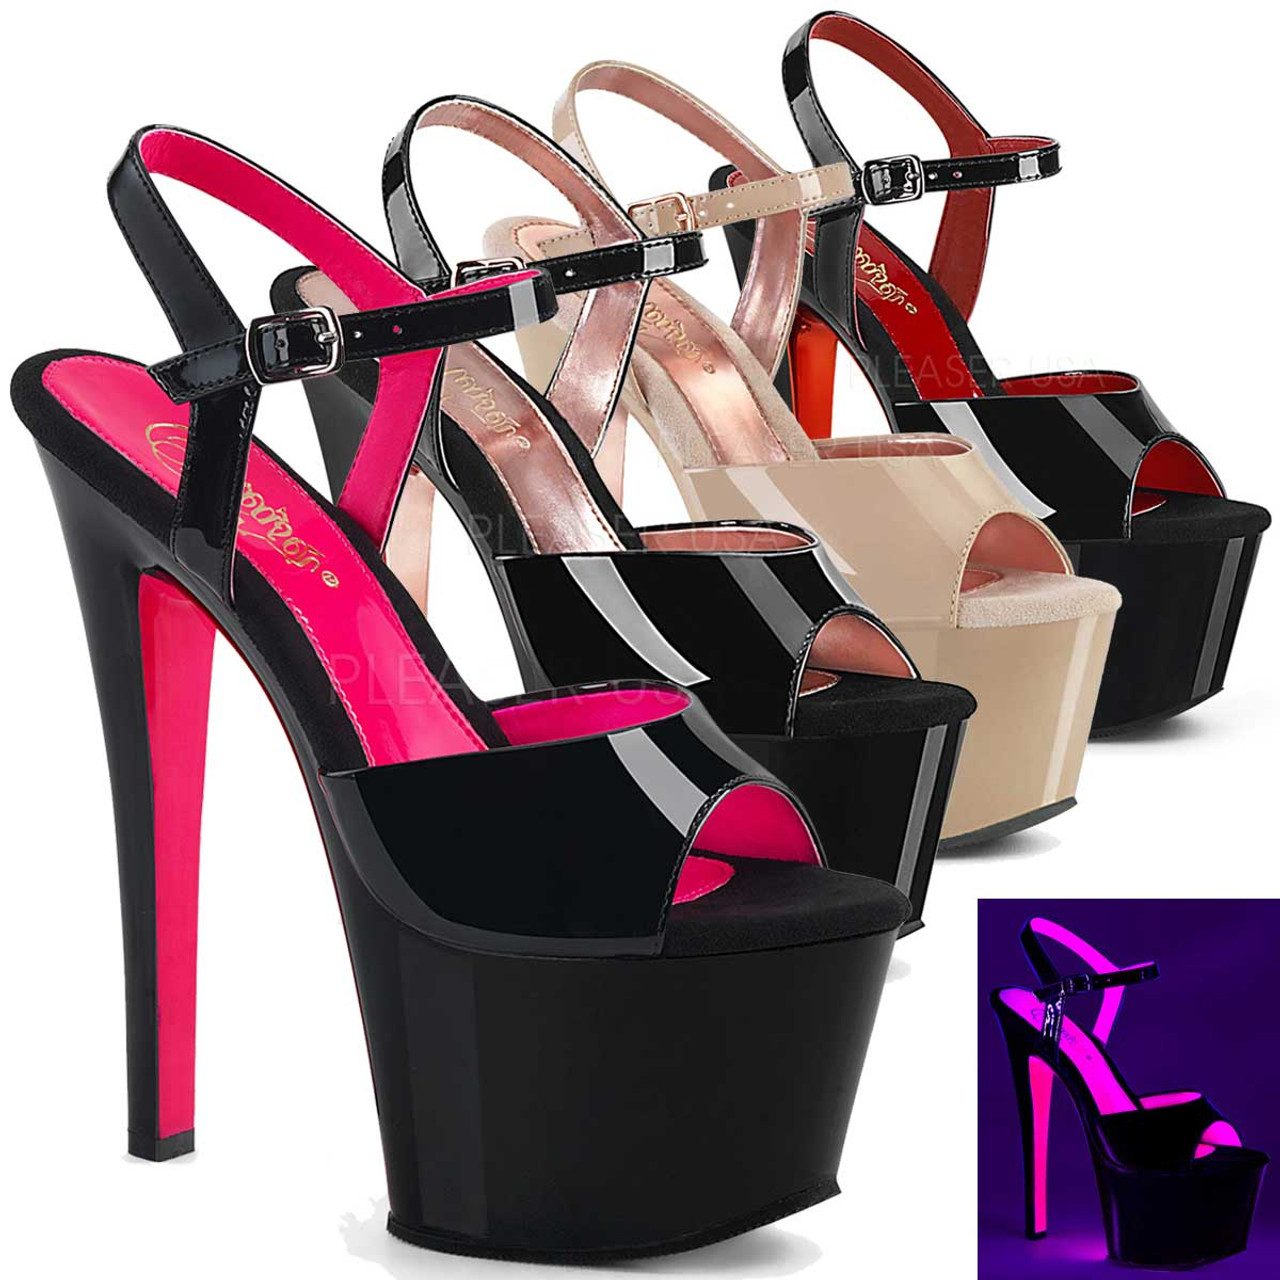 Pleaser Adore-708 - Clear Pink Chrome in Sexy Heels & Platforms - $67.95